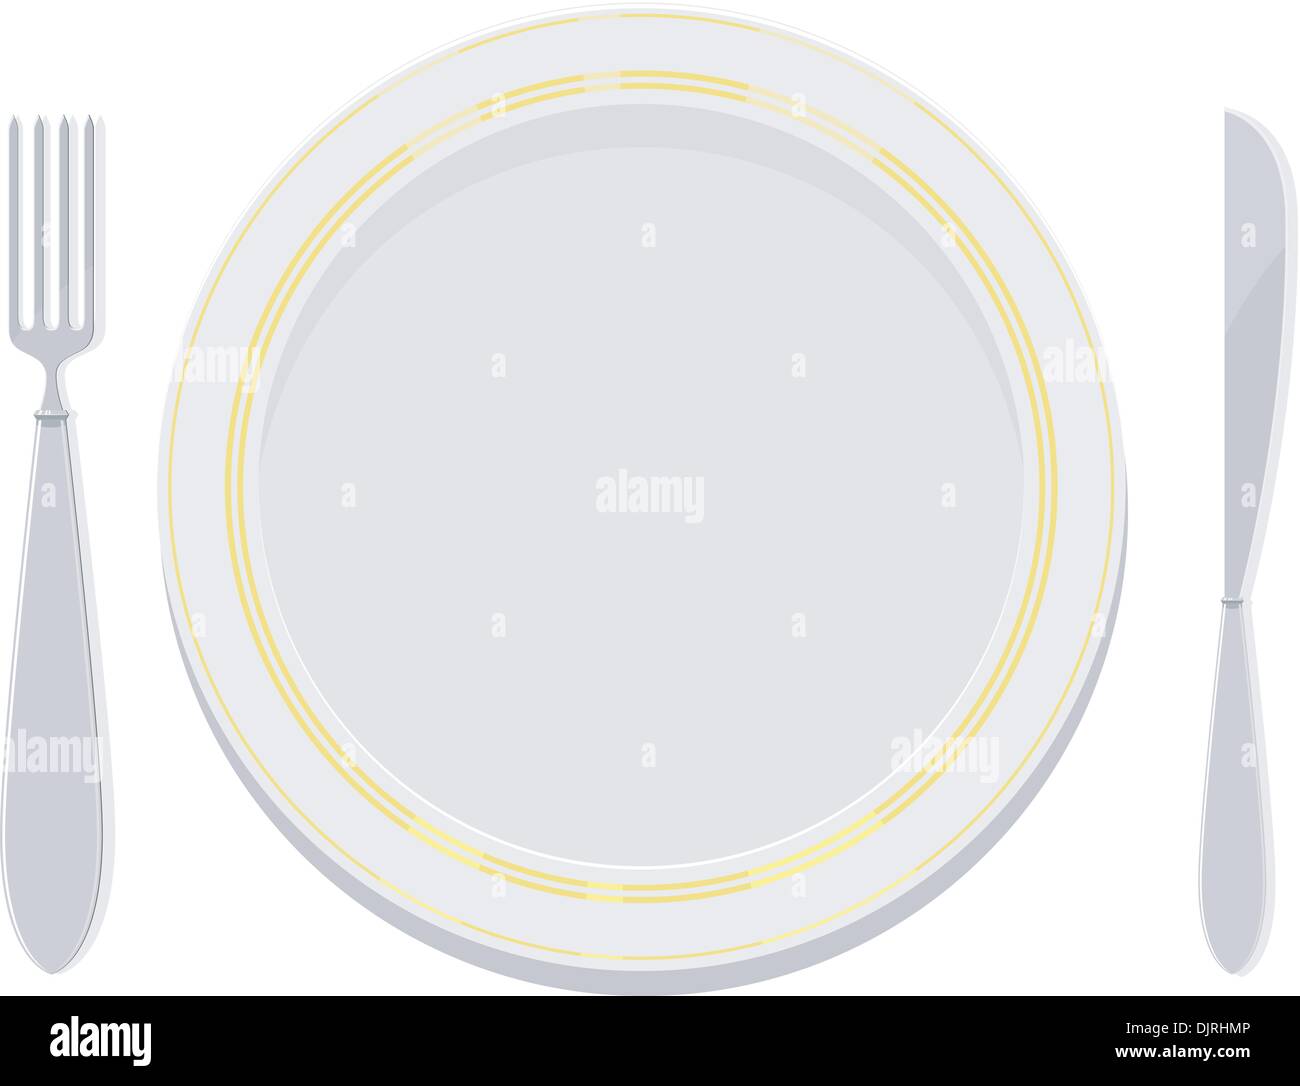 Vector image  plates with a gold rim with a fork and knife Stock Vector